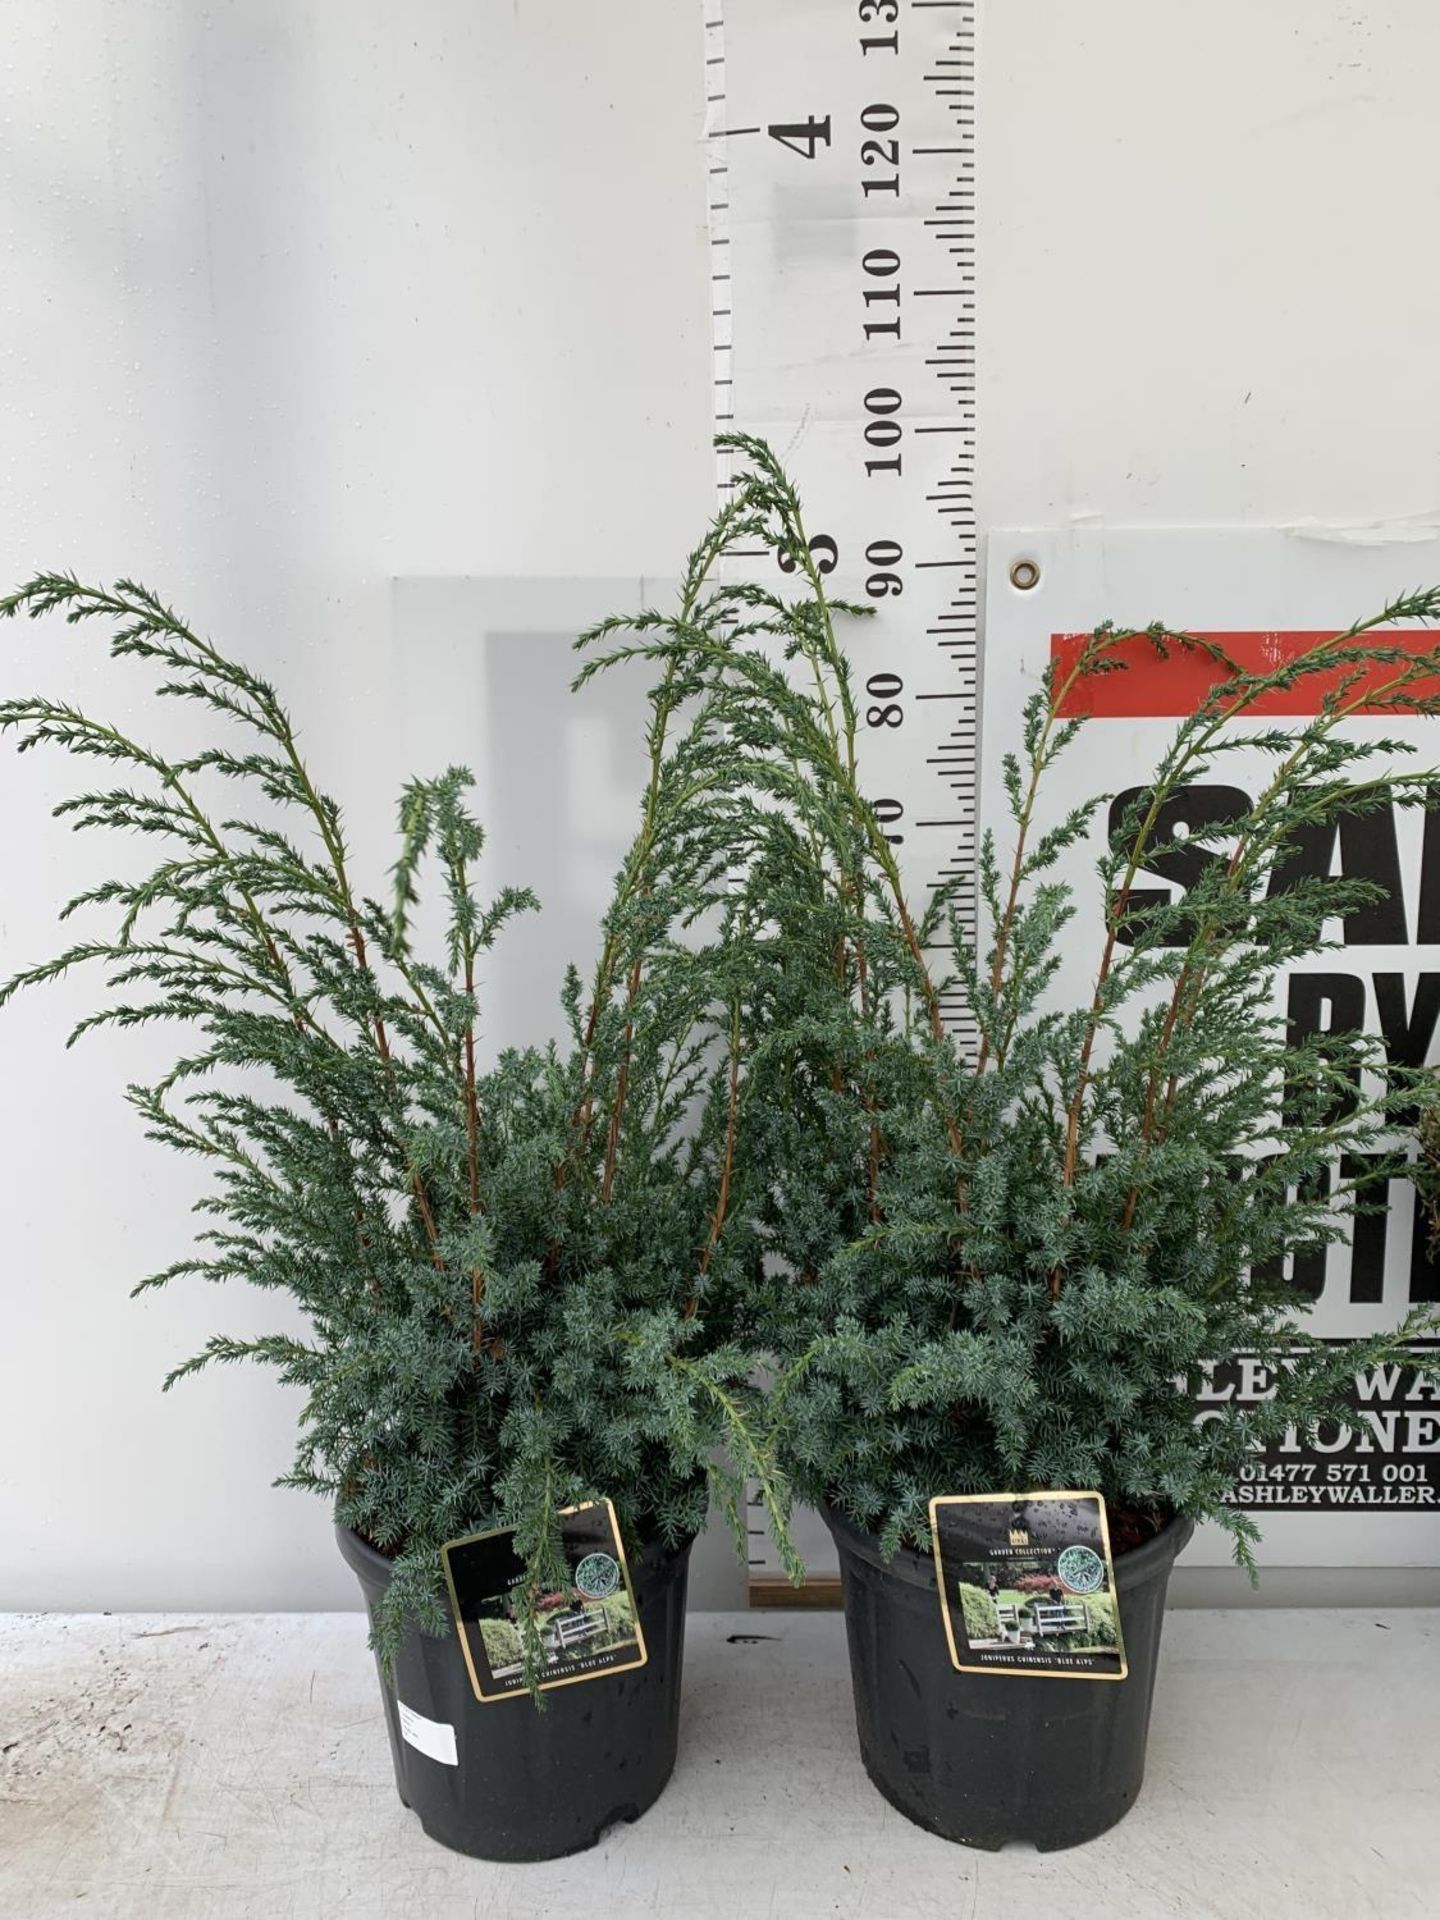 TWO JUNIPERUS CHINENSIS BLUE ALPS IN 7 LTR POTS A METRE IN HEIGHT PLUS VAT TO BE SOLD FOR THE TWO - Image 4 of 22